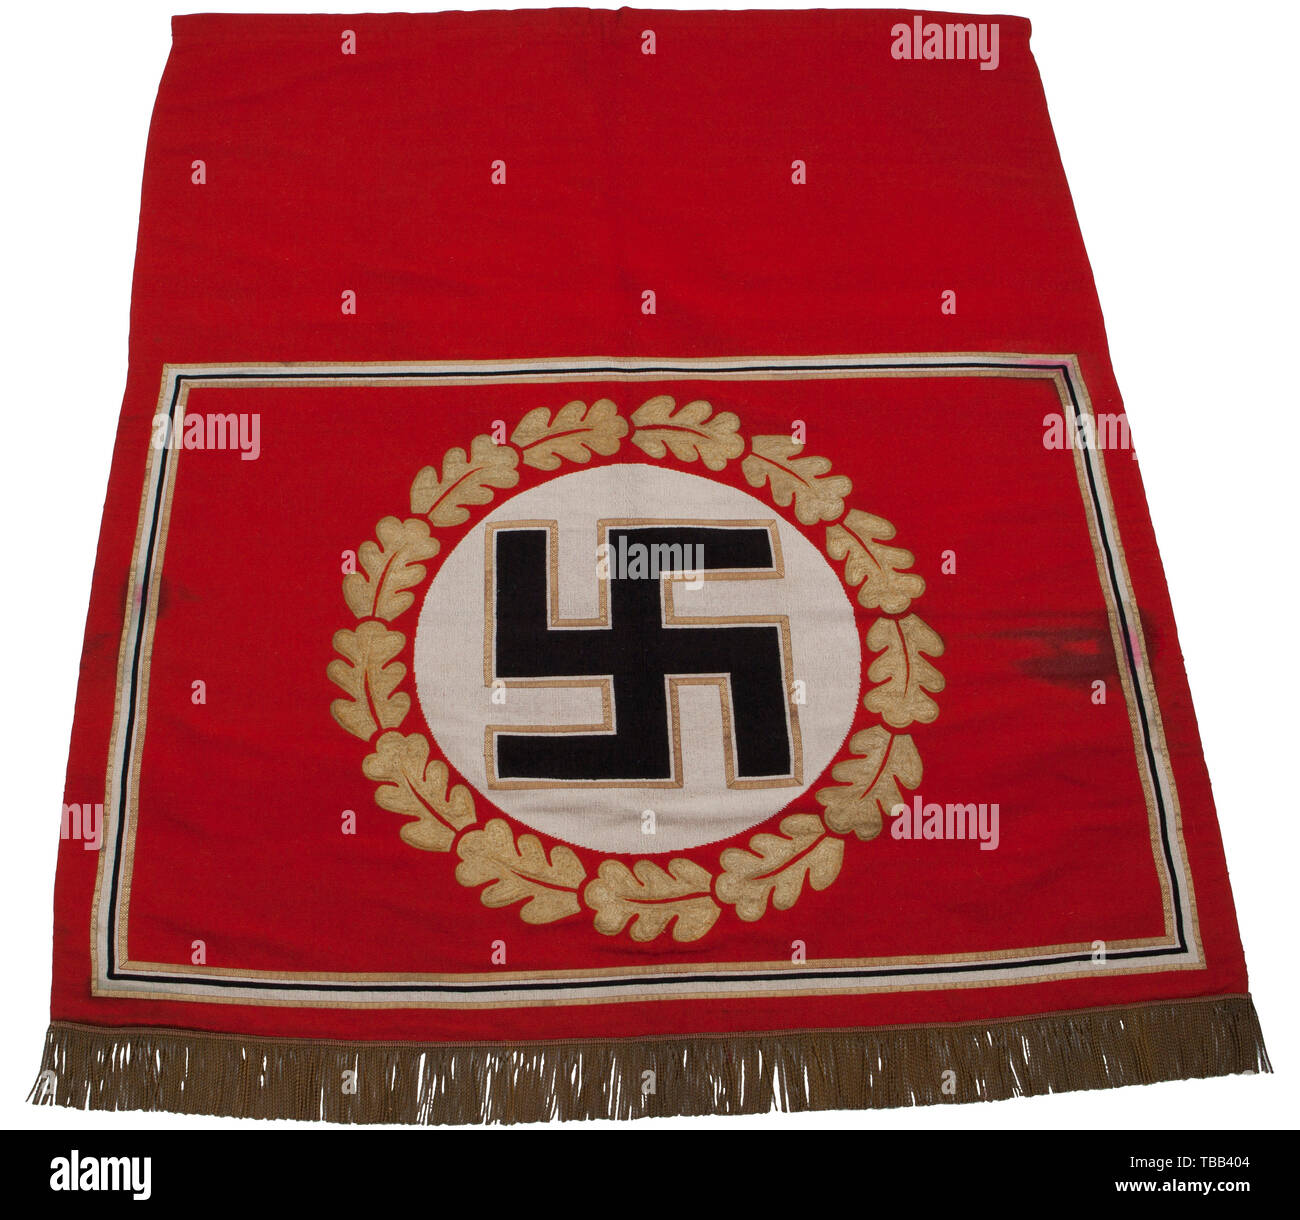 A Reich Chancellery tapestry From the New Reich's Chancellery in Berlin, heavy cotton construction, some soiling. Red field, with black-white border and gold edging. In centre, white disk with black swastika with gold trim, surrounded by gold-embroidered oak leaf wreath. Finished with gold fringe. Reverse covered in red cotton with tag embroidered 'RZM NSDAP der Obergebietsführer SA'. Upper edge with broad hem, inside a sleeve for wall hanging rod. Size 195 x 220 cm. See: Lt. Col. Thomas N. Johnson 'World War II German War Booty' Columbia 1982, p. 56 et seq. with illustrati, Editorial-Use-Only Stock Photo